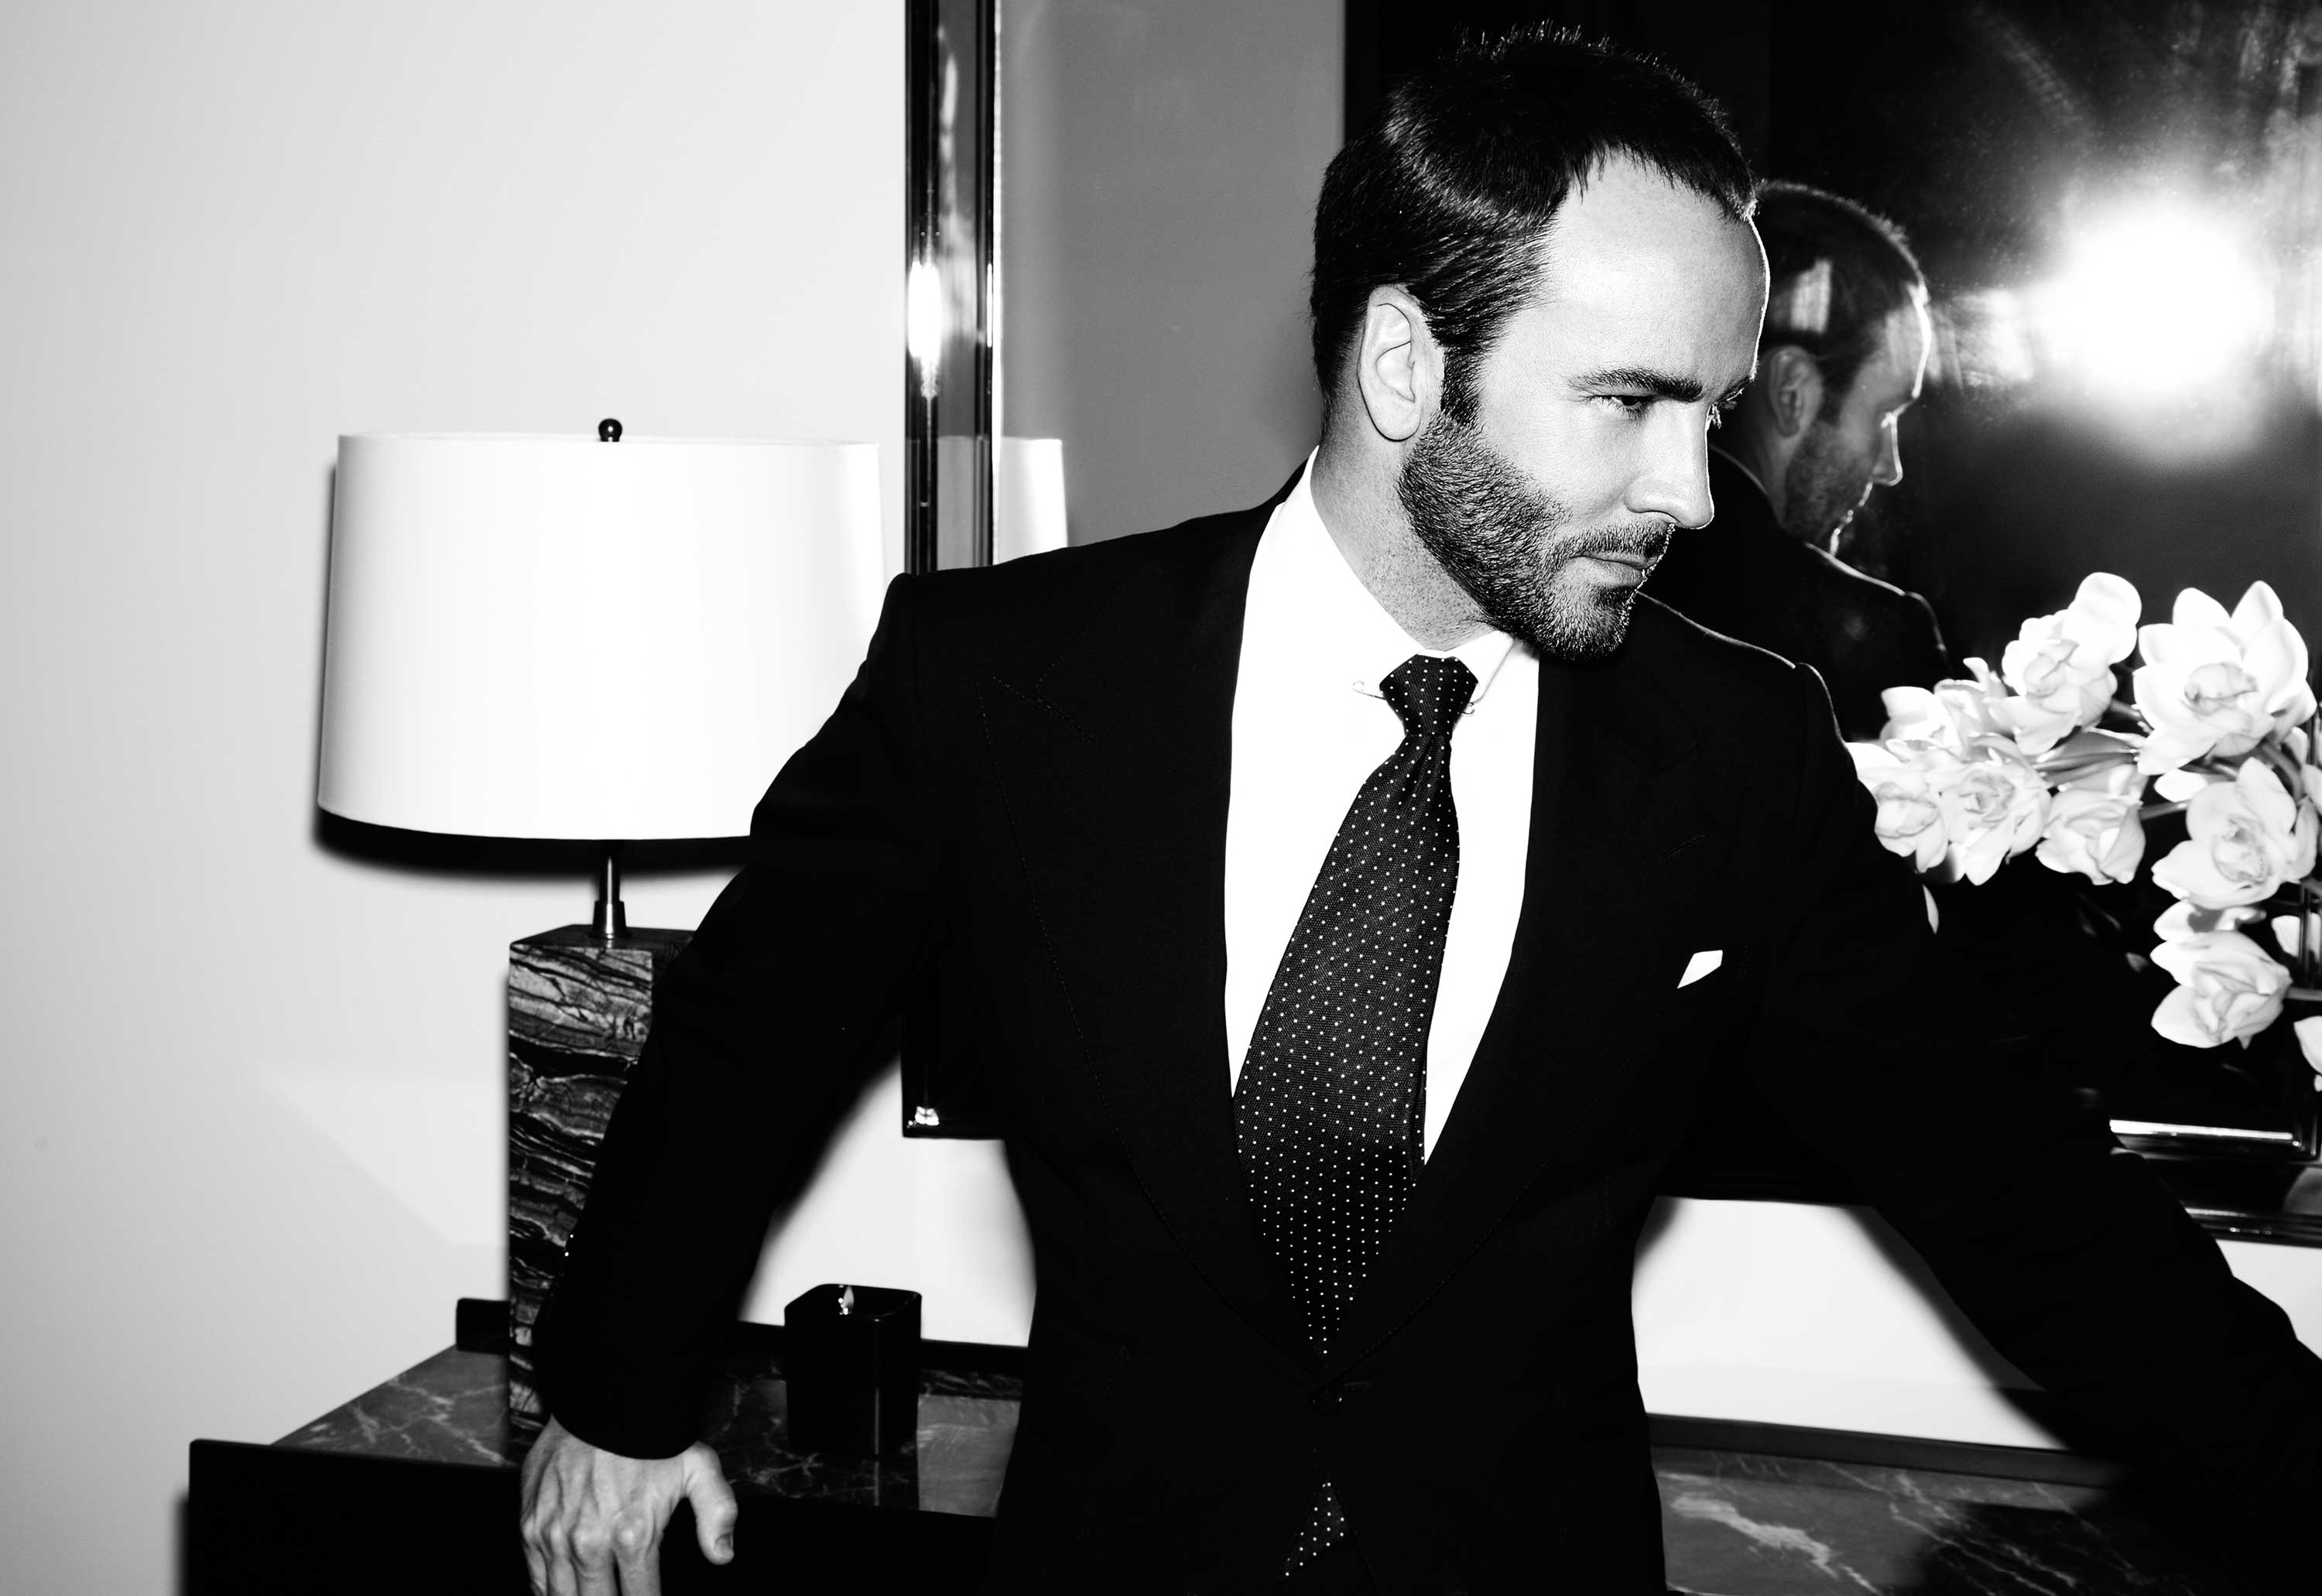 Why does tom ford want to sell his personal brand?